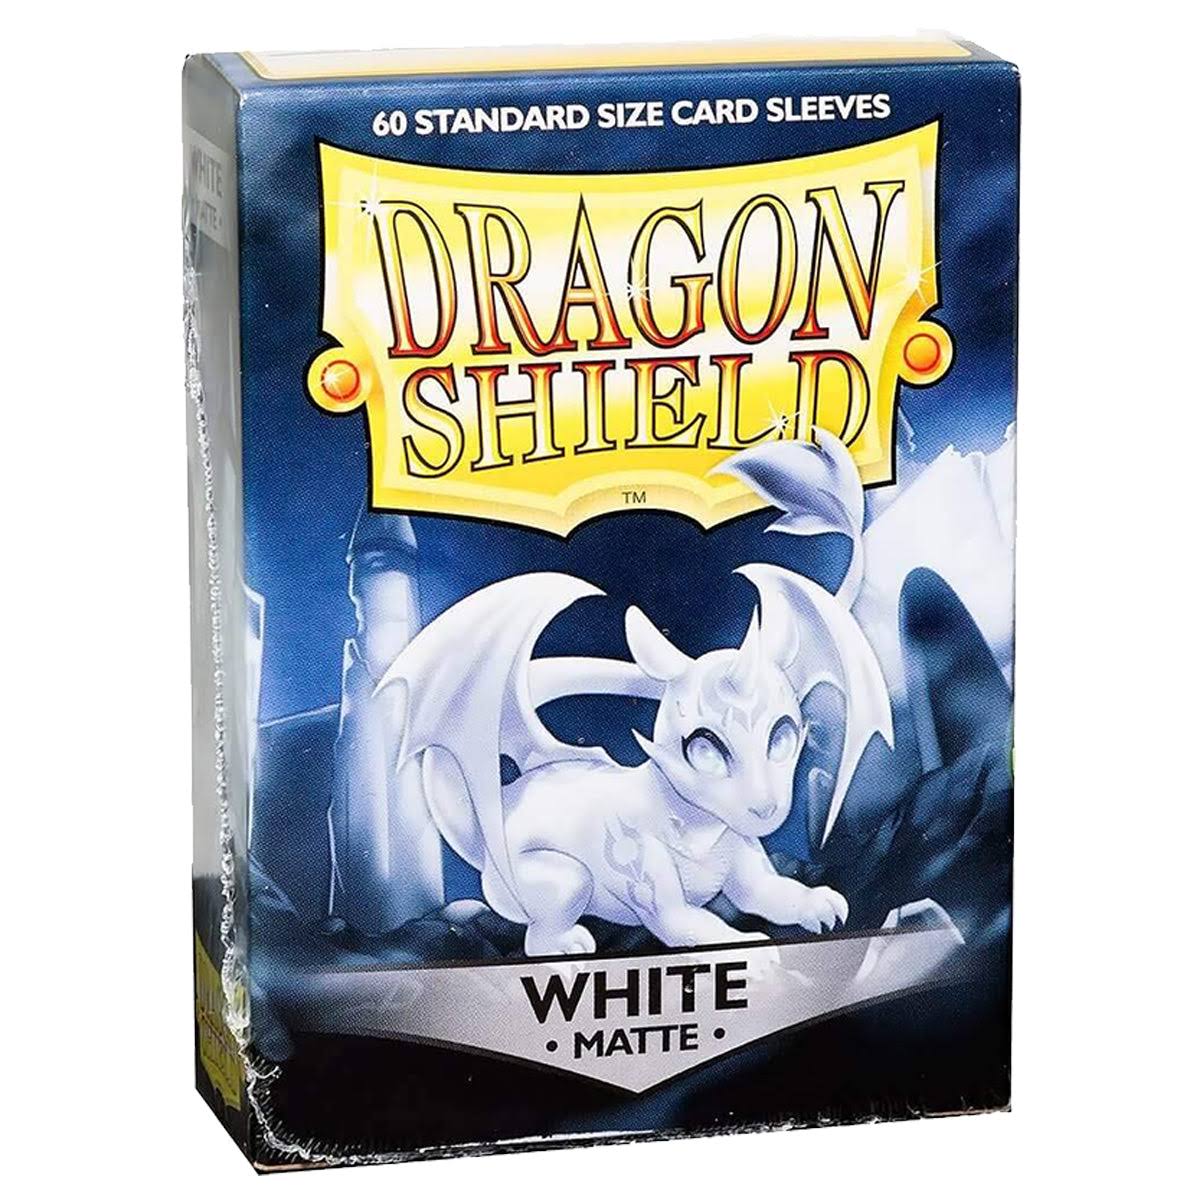 Dragon Shield Card Sleeves - White, Standard Size, 60ct